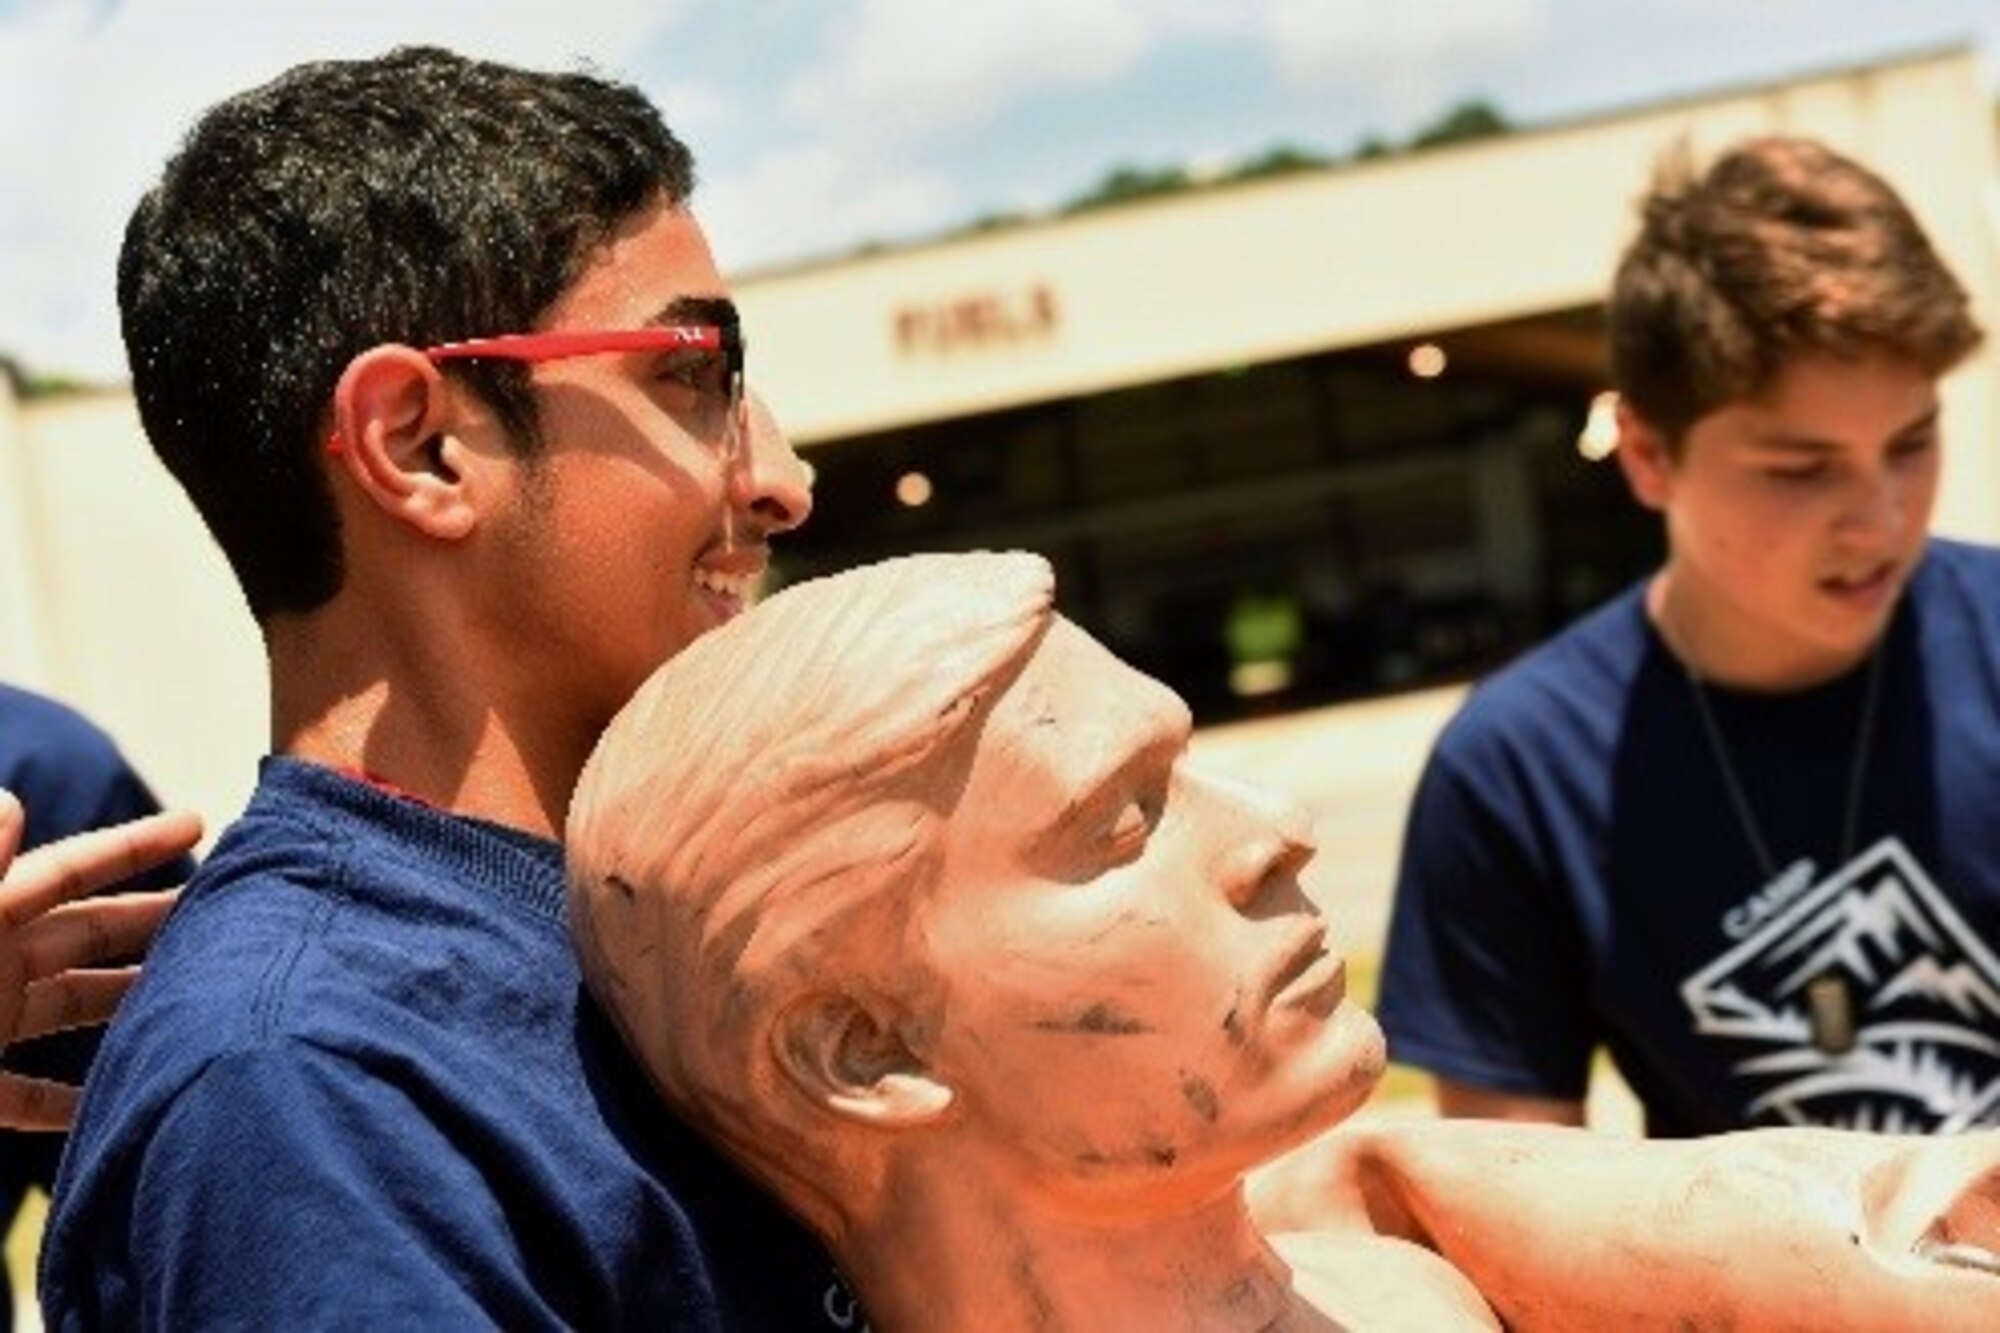 Camp Confidence students learn and practice the fireman carry with a dummy during a base tour, June 27, 2016, at Seymour Johnson Air Force Base, North Carolina. The Camp Confidence program aims to show youth careers that are available to good-standing citizens. (U.S. Air Force photo/Airman 1st Class Ashley Williamson)